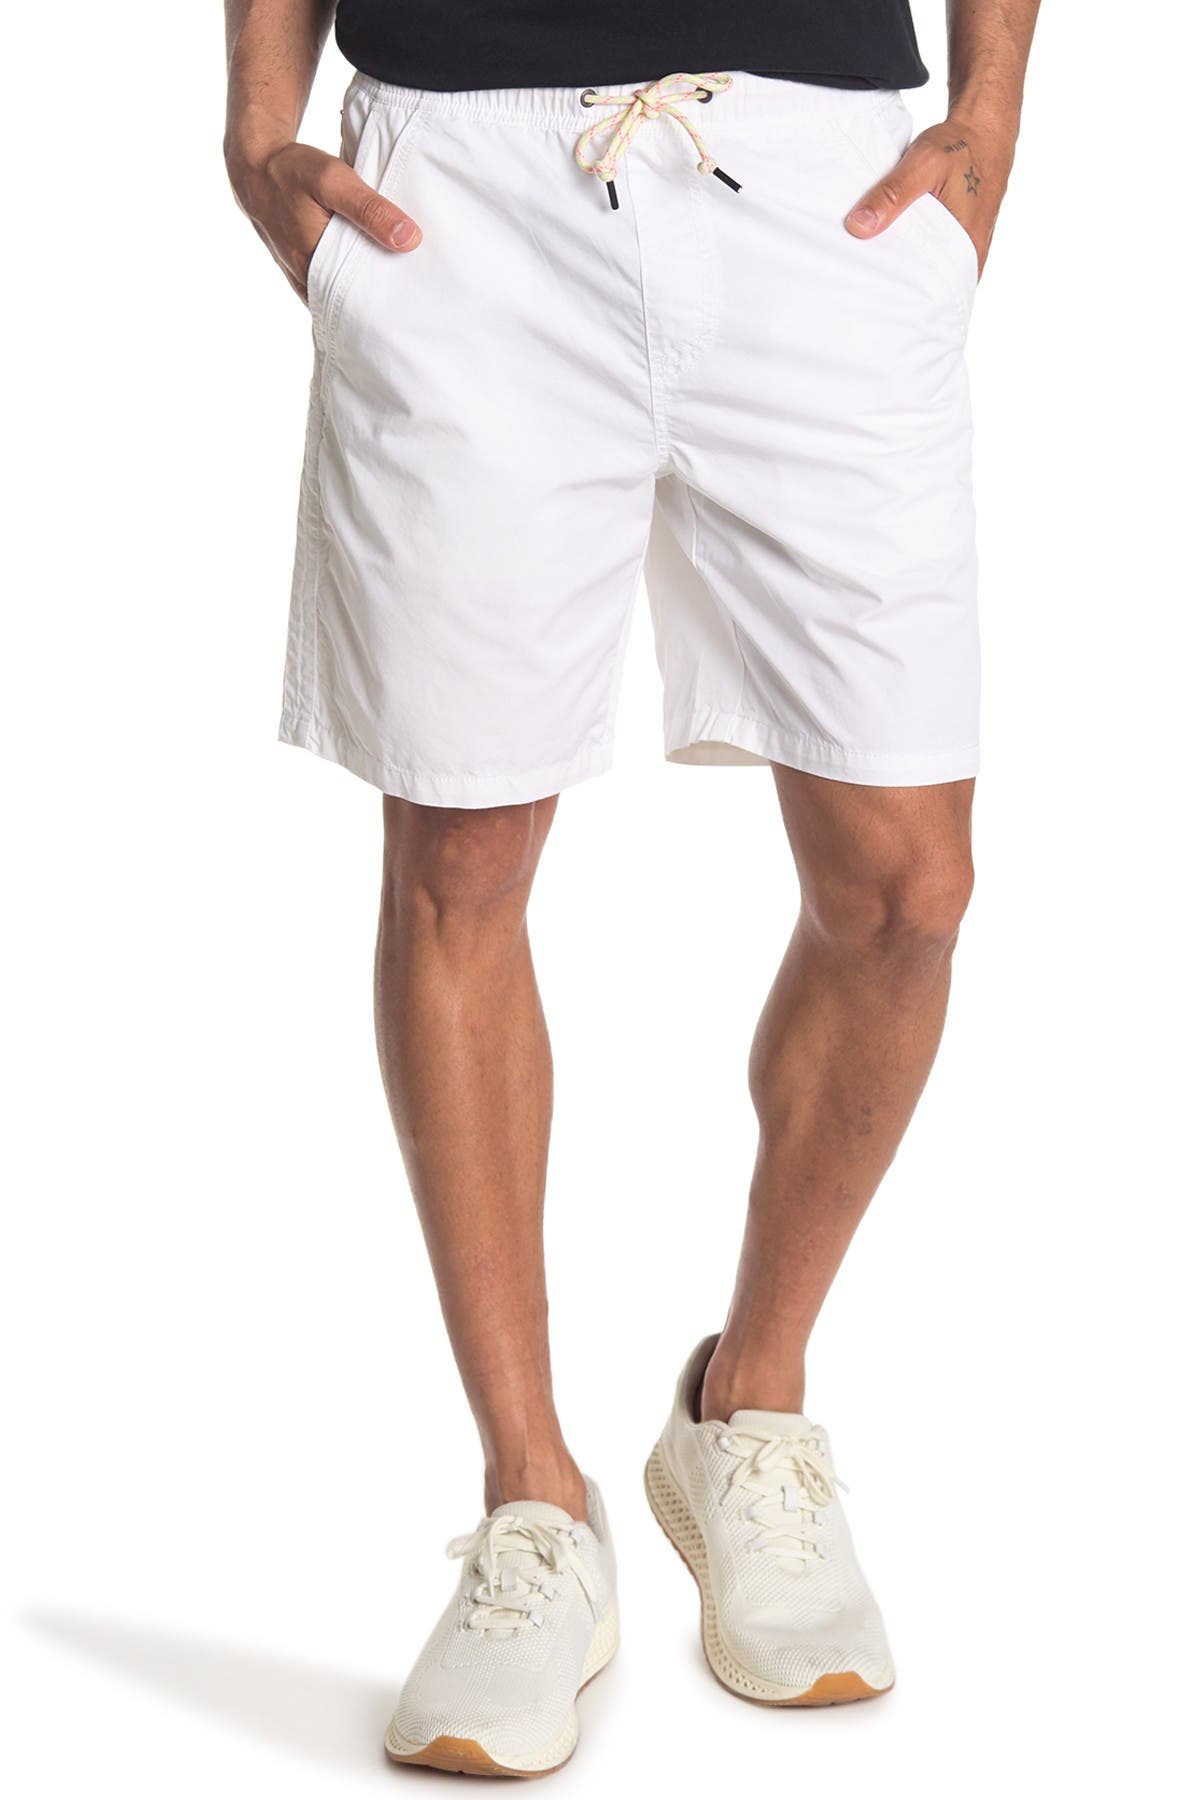 Union Denim Sun-sational Pull-on Woven Shorts In Open White